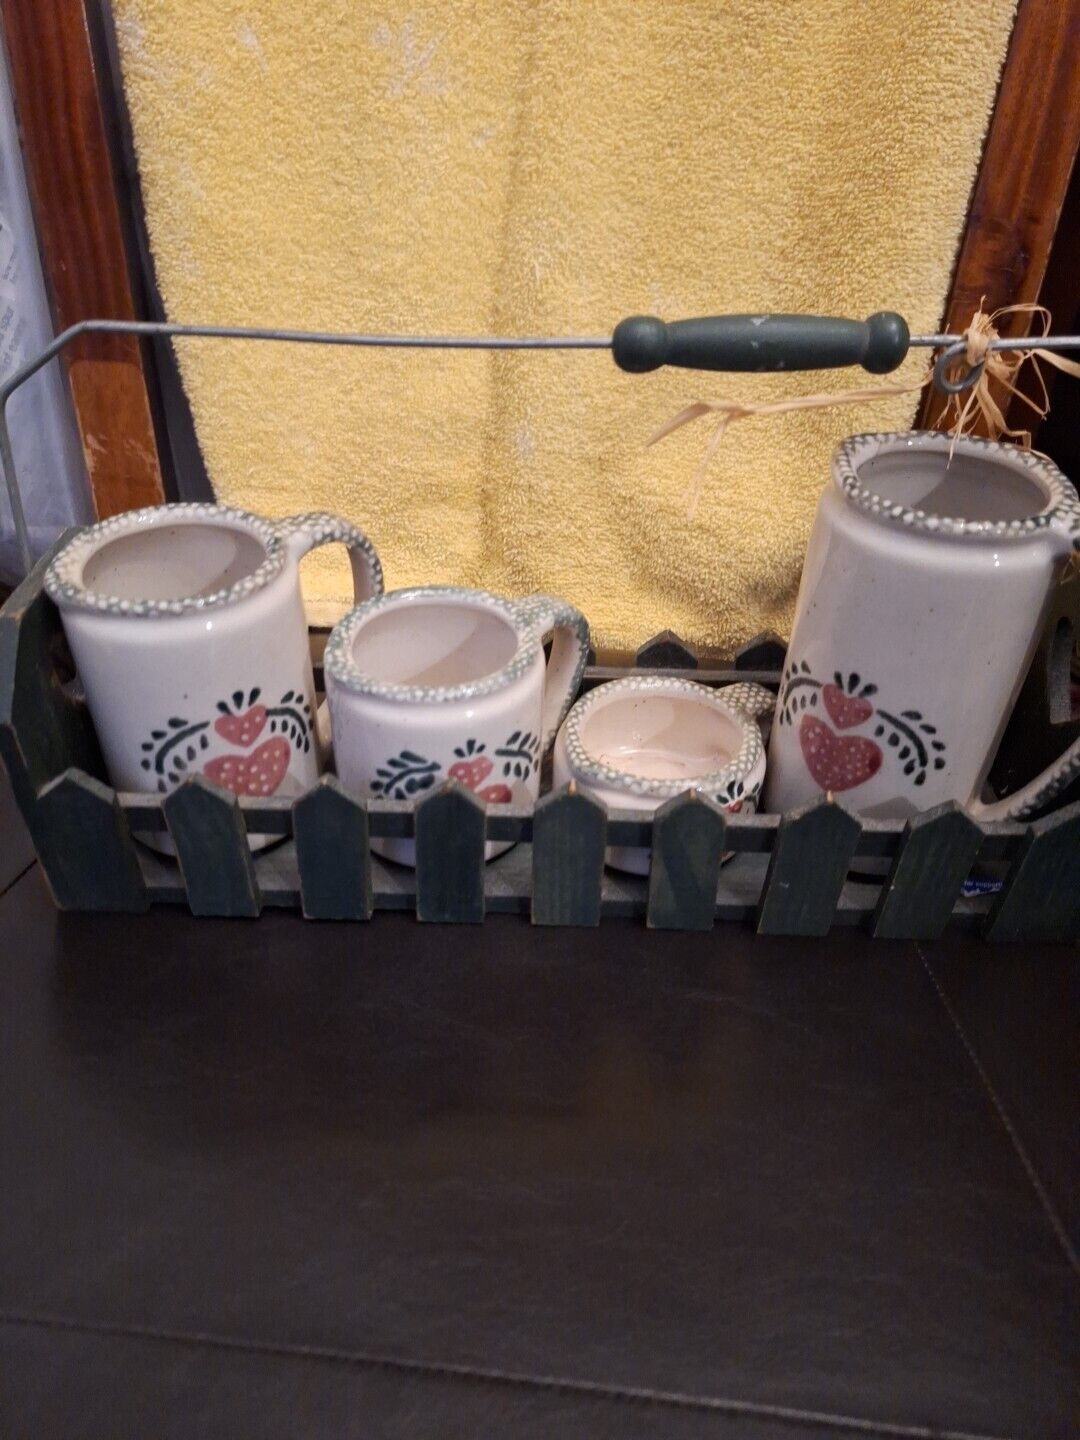 Vintage Measuring Cups In Wooden Box